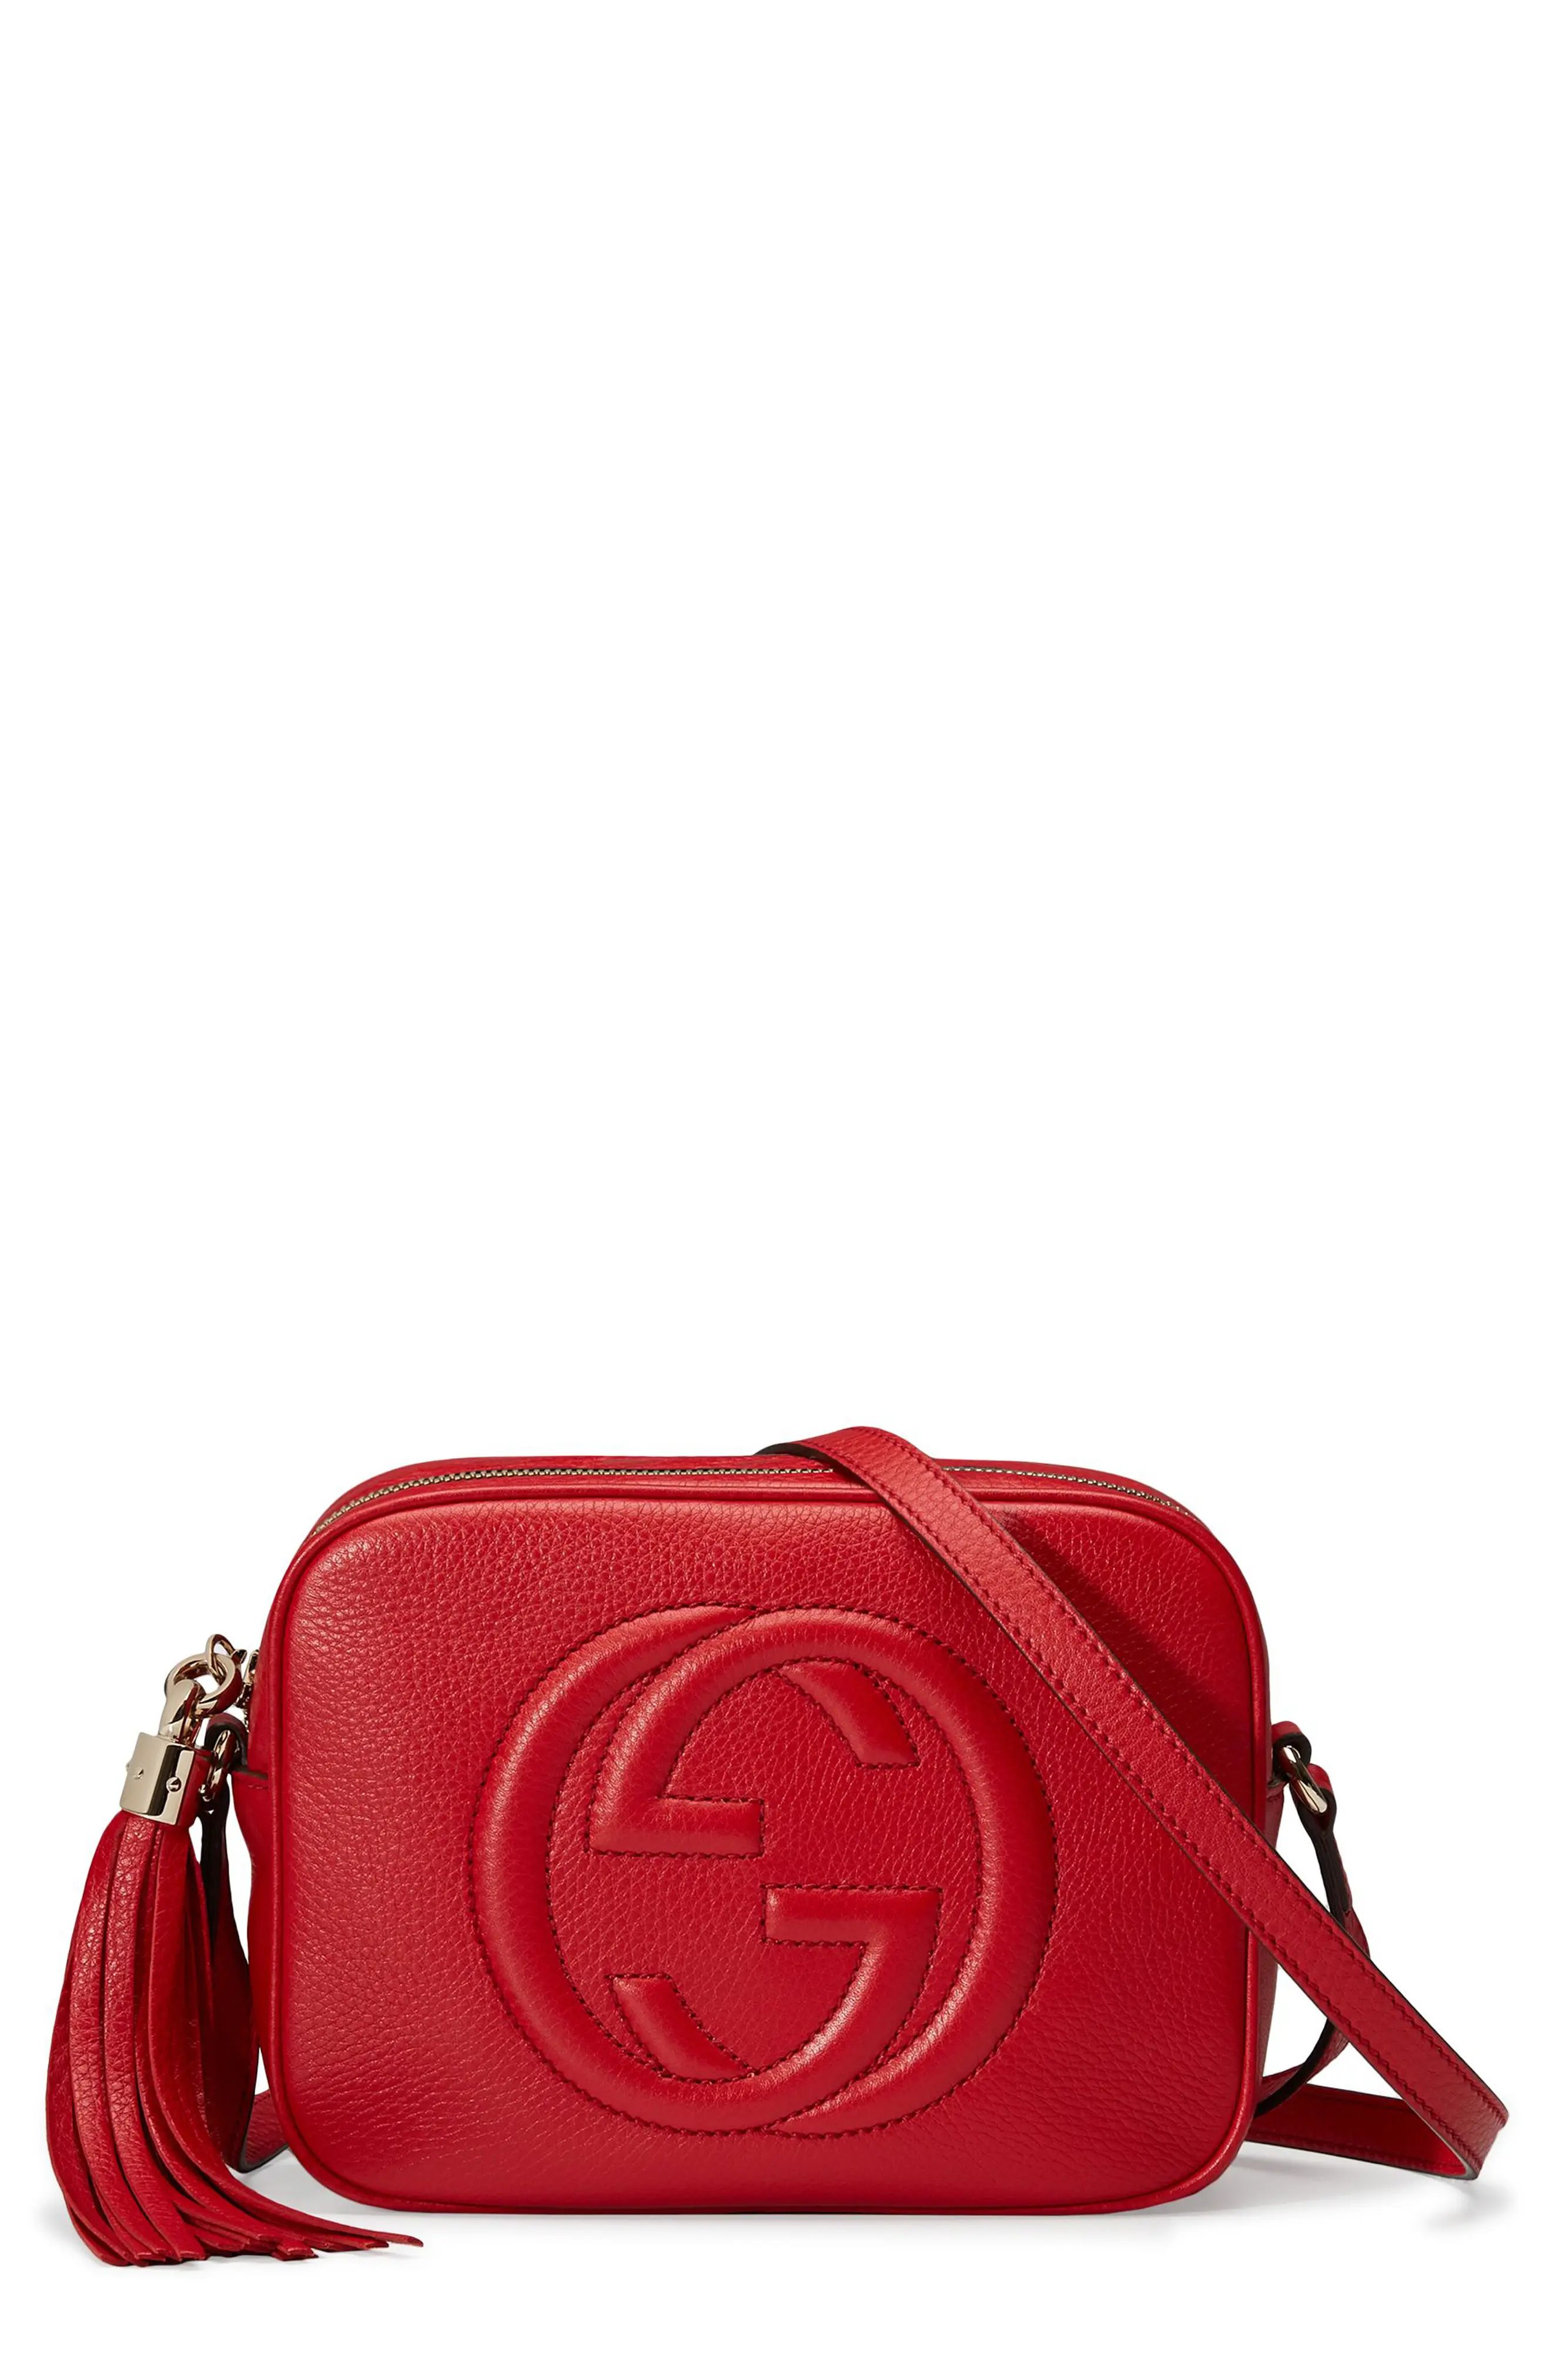 Gucci Soho Disco Leather Bag | Nordstrom